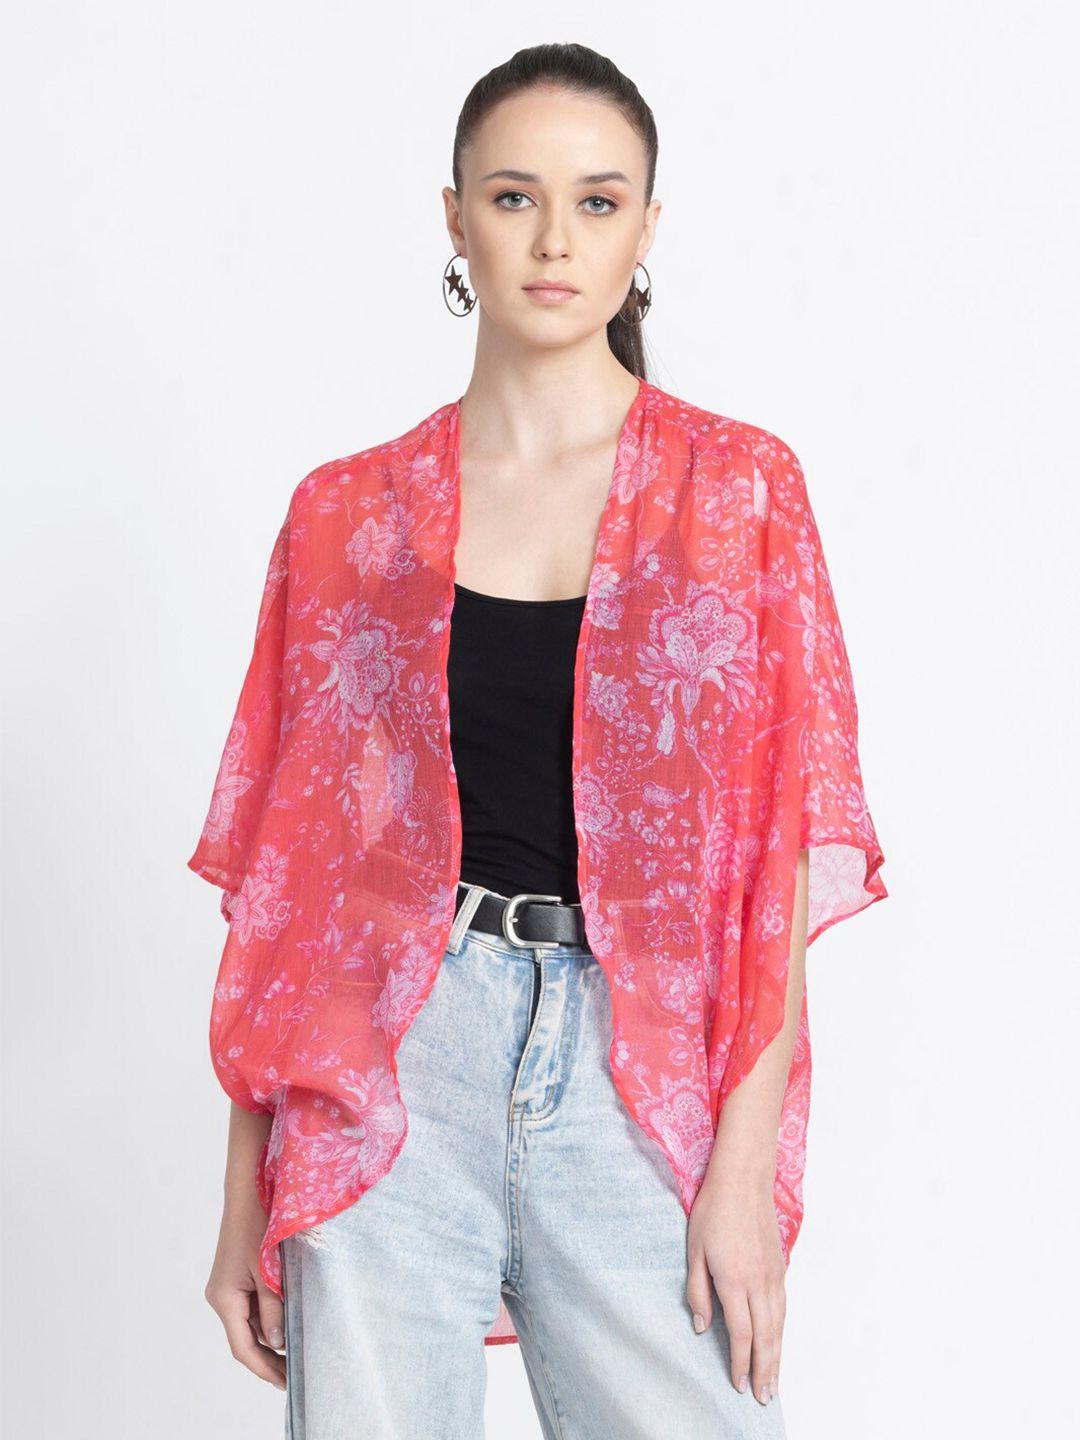 shaye floral printed front open pure cotton shrug